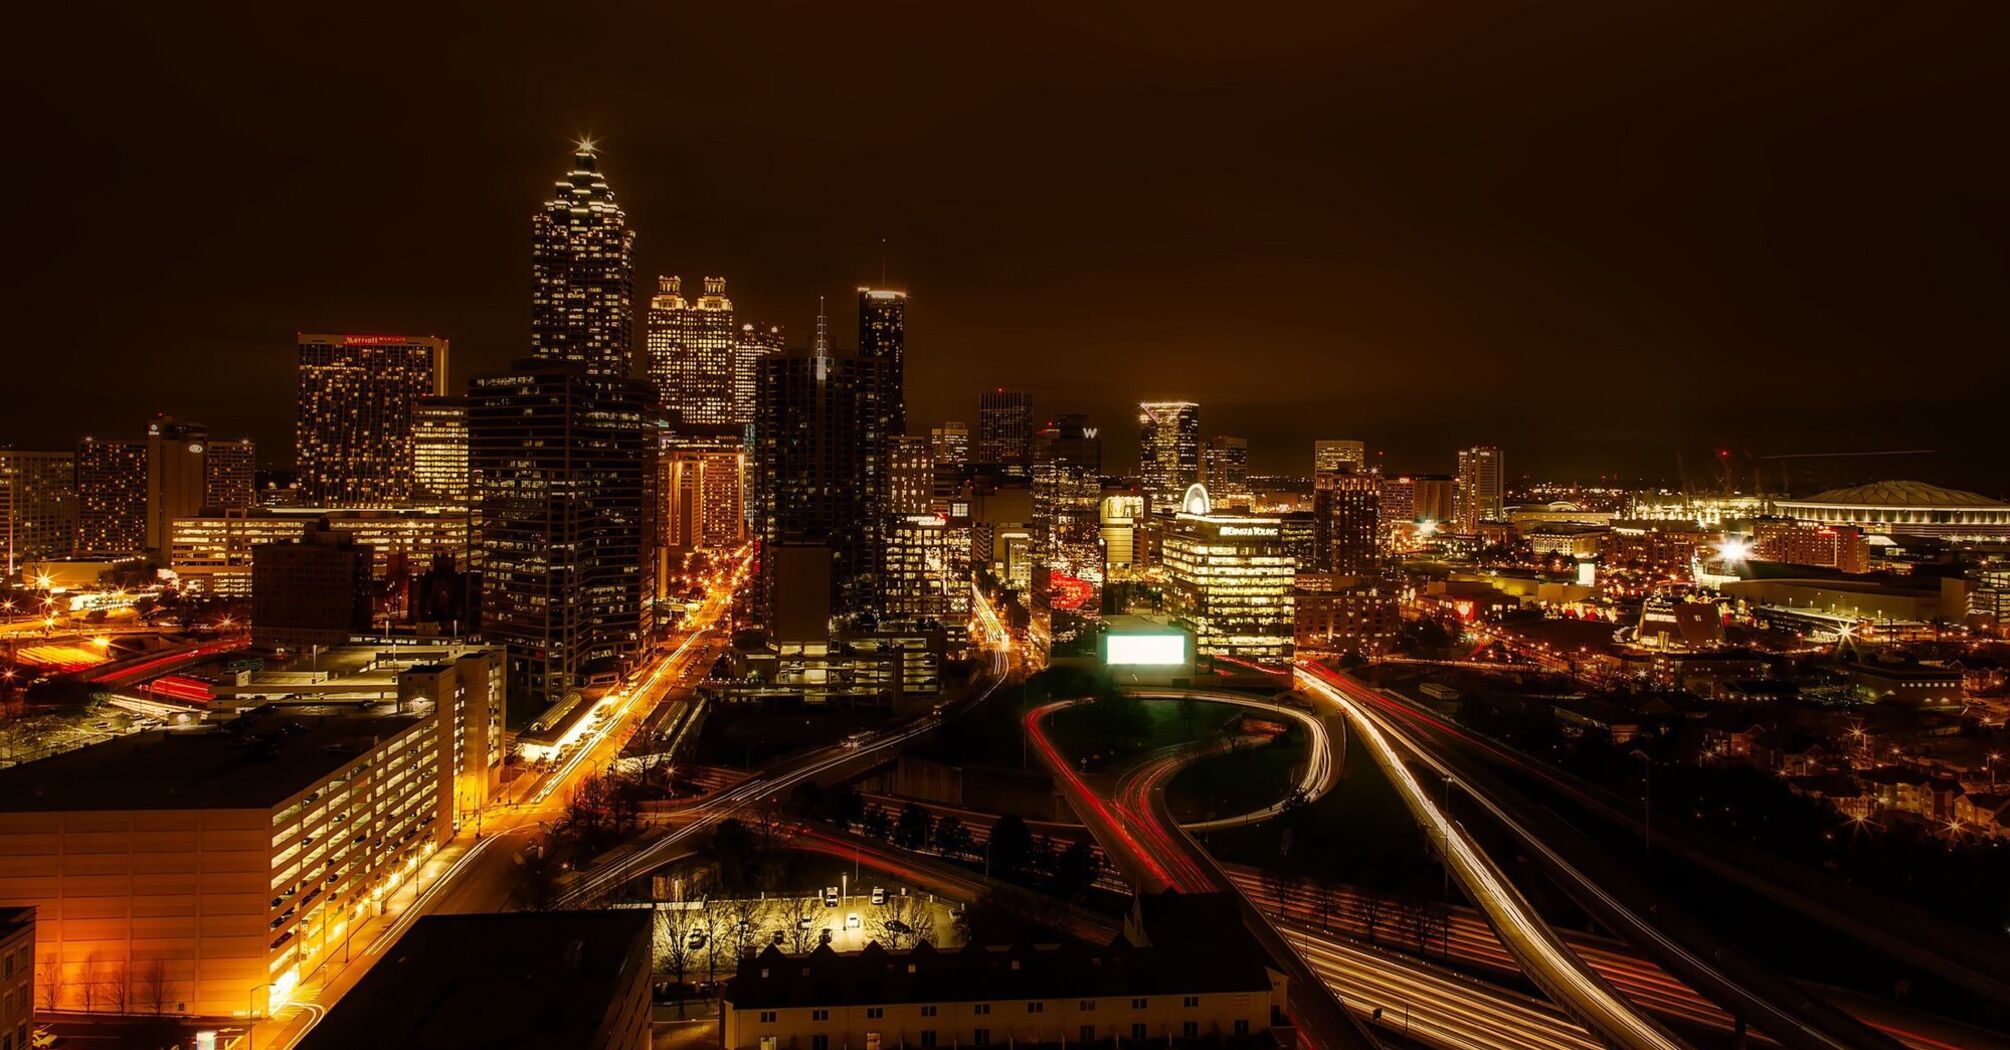 Night view of Atlanta city skyline with illuminated buildings and busy highways